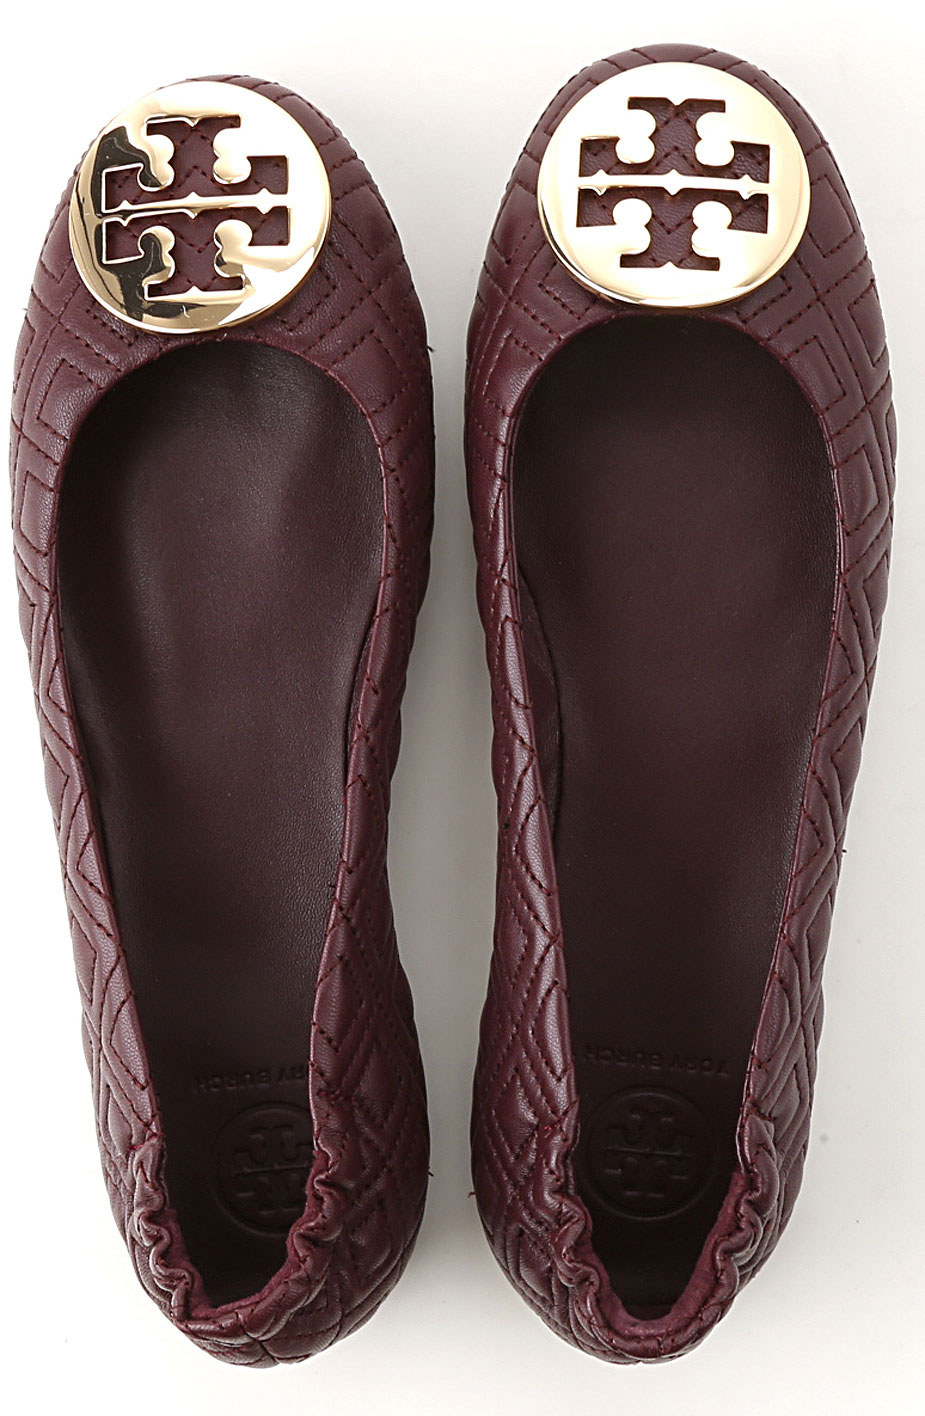 Womens Shoes Tory Burch, Style code: 50736-616-